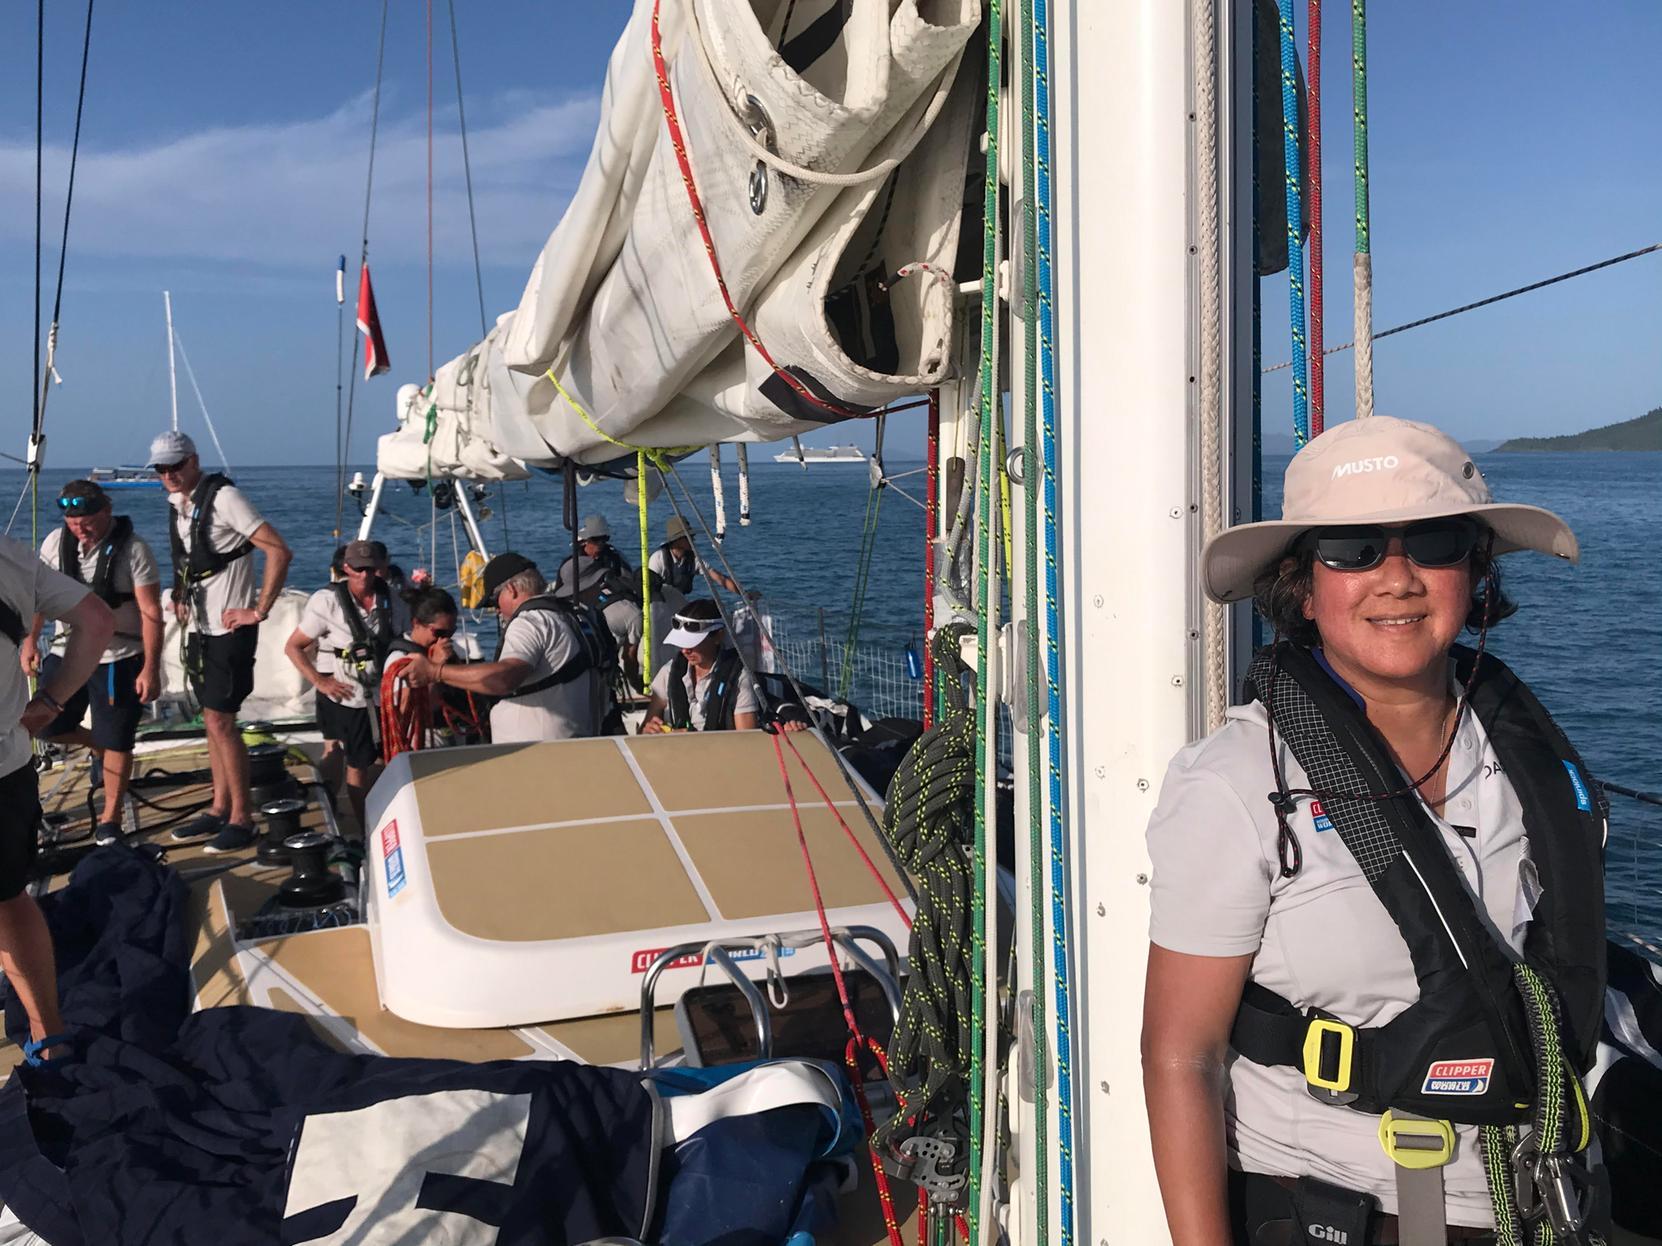 Theresia Cadwallader takes part in a refresher sailing session before race begins.